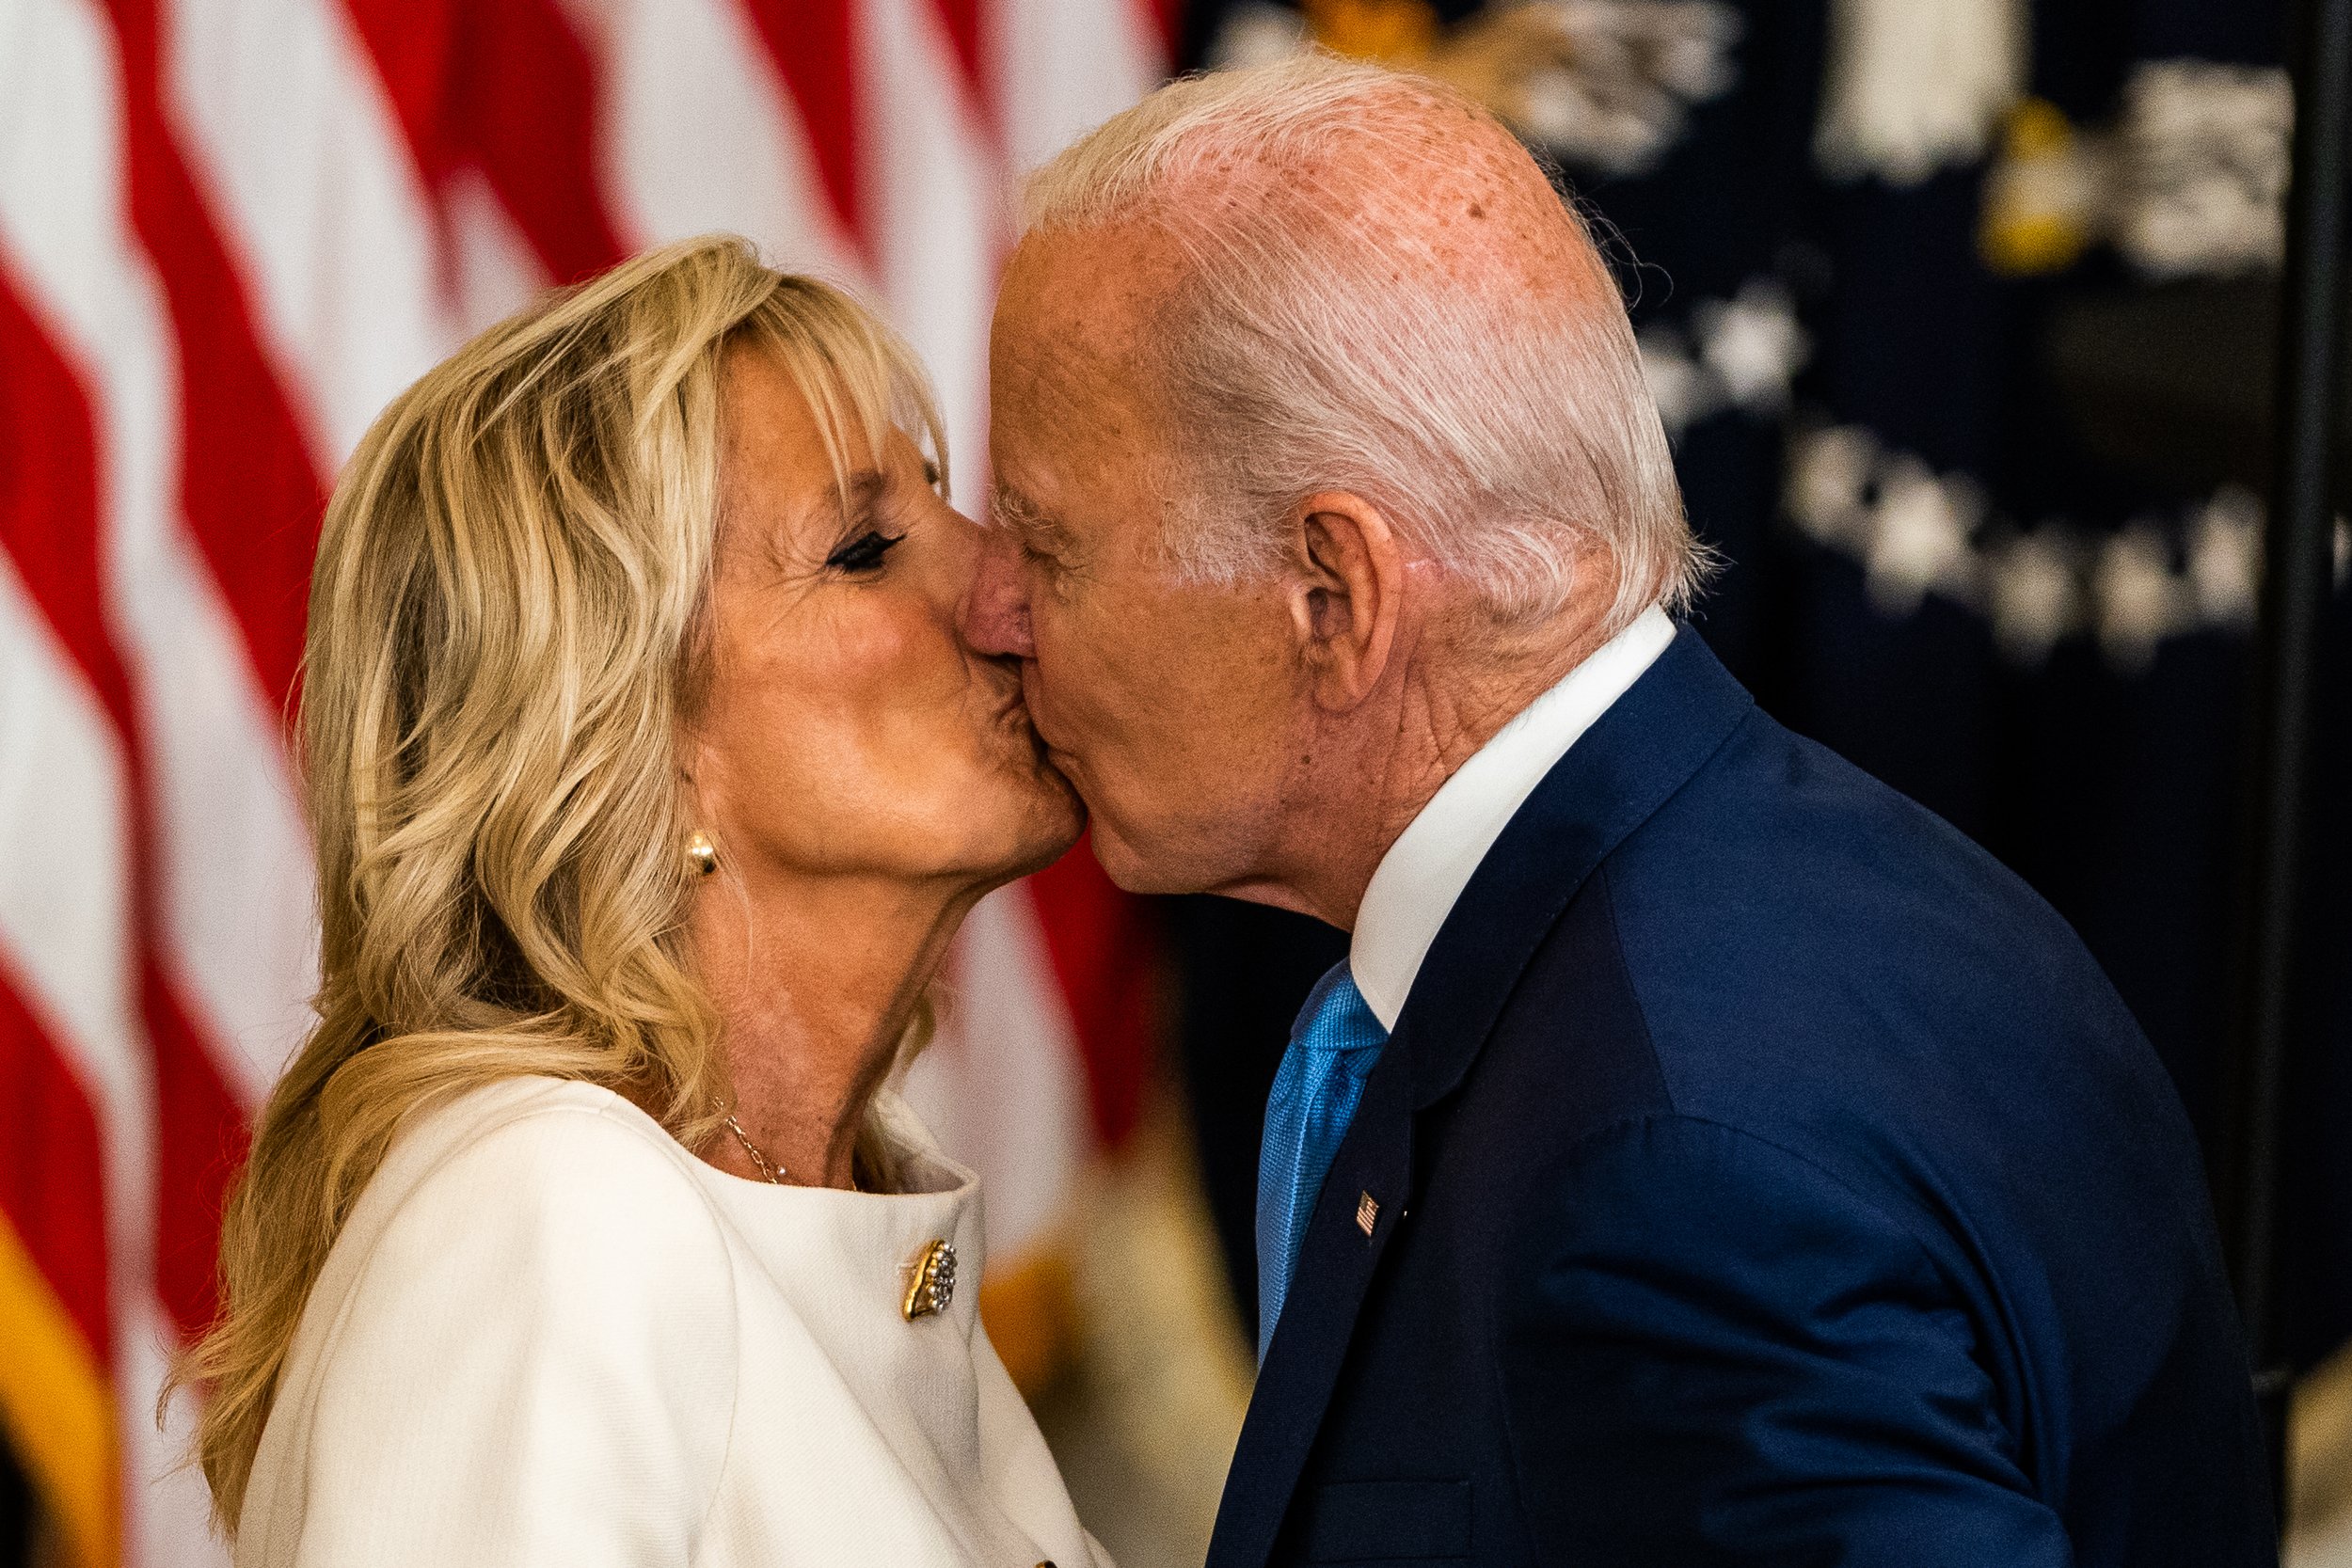  US President Joe Biden and First Lady Jill Biden share a kiss during the unveiling of the Obama's official White House portraits ceremony in the East Room. 